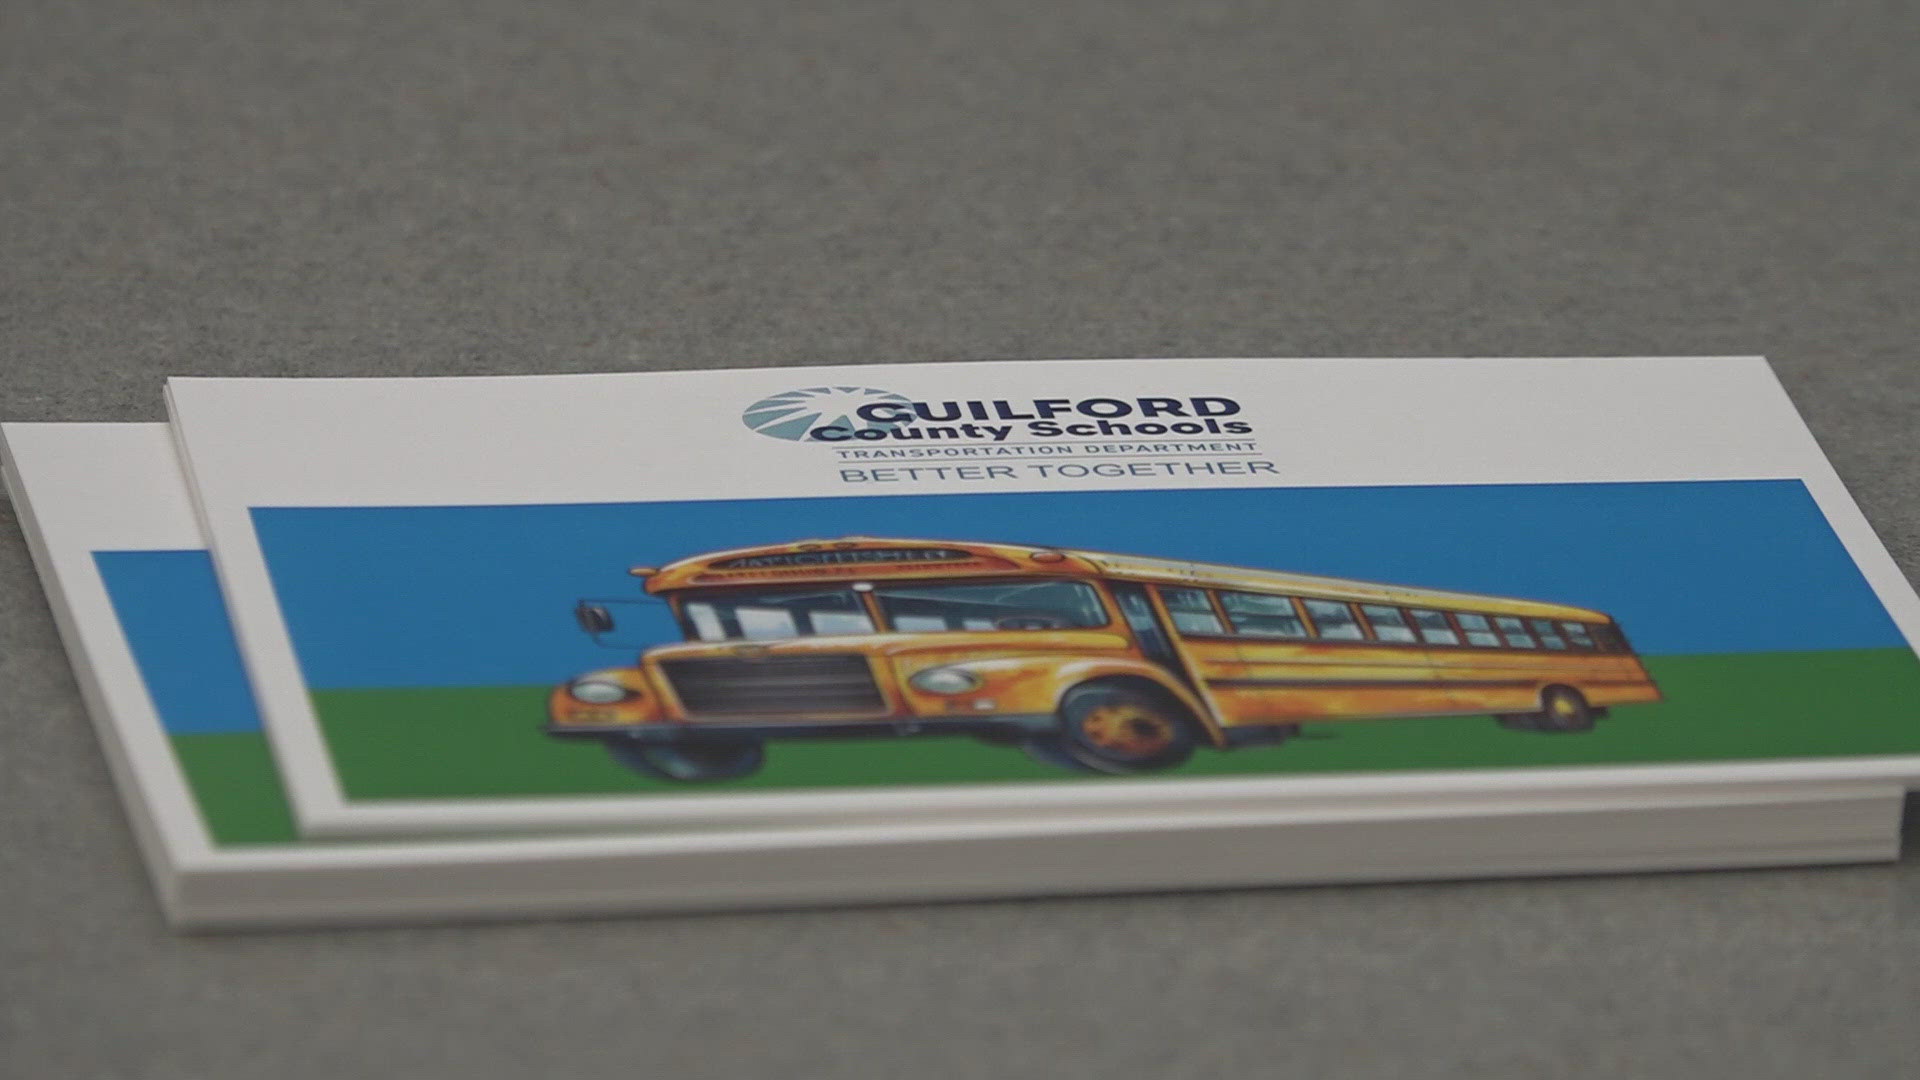 GCS said more than 10,000 students are signed up but don’t use the bus.